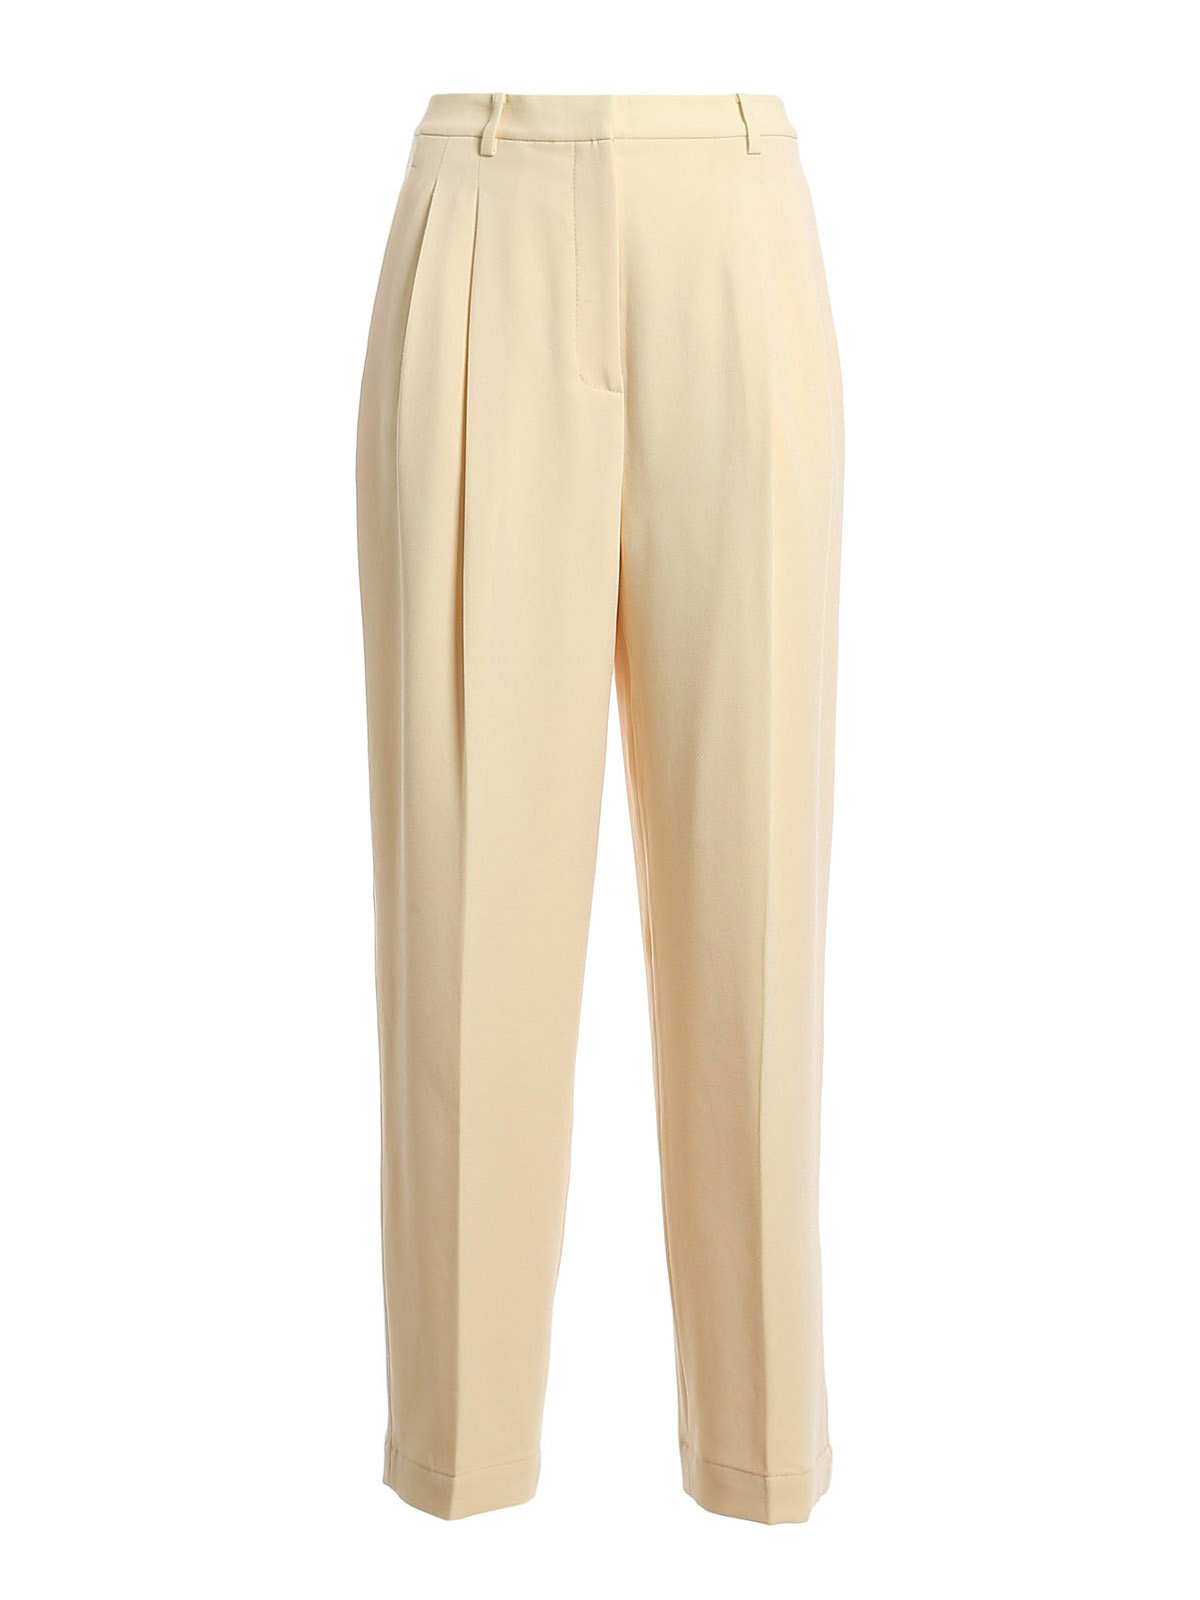 Tailored & Formal trousers Tory Burch - Crêpe trousers - 70378252